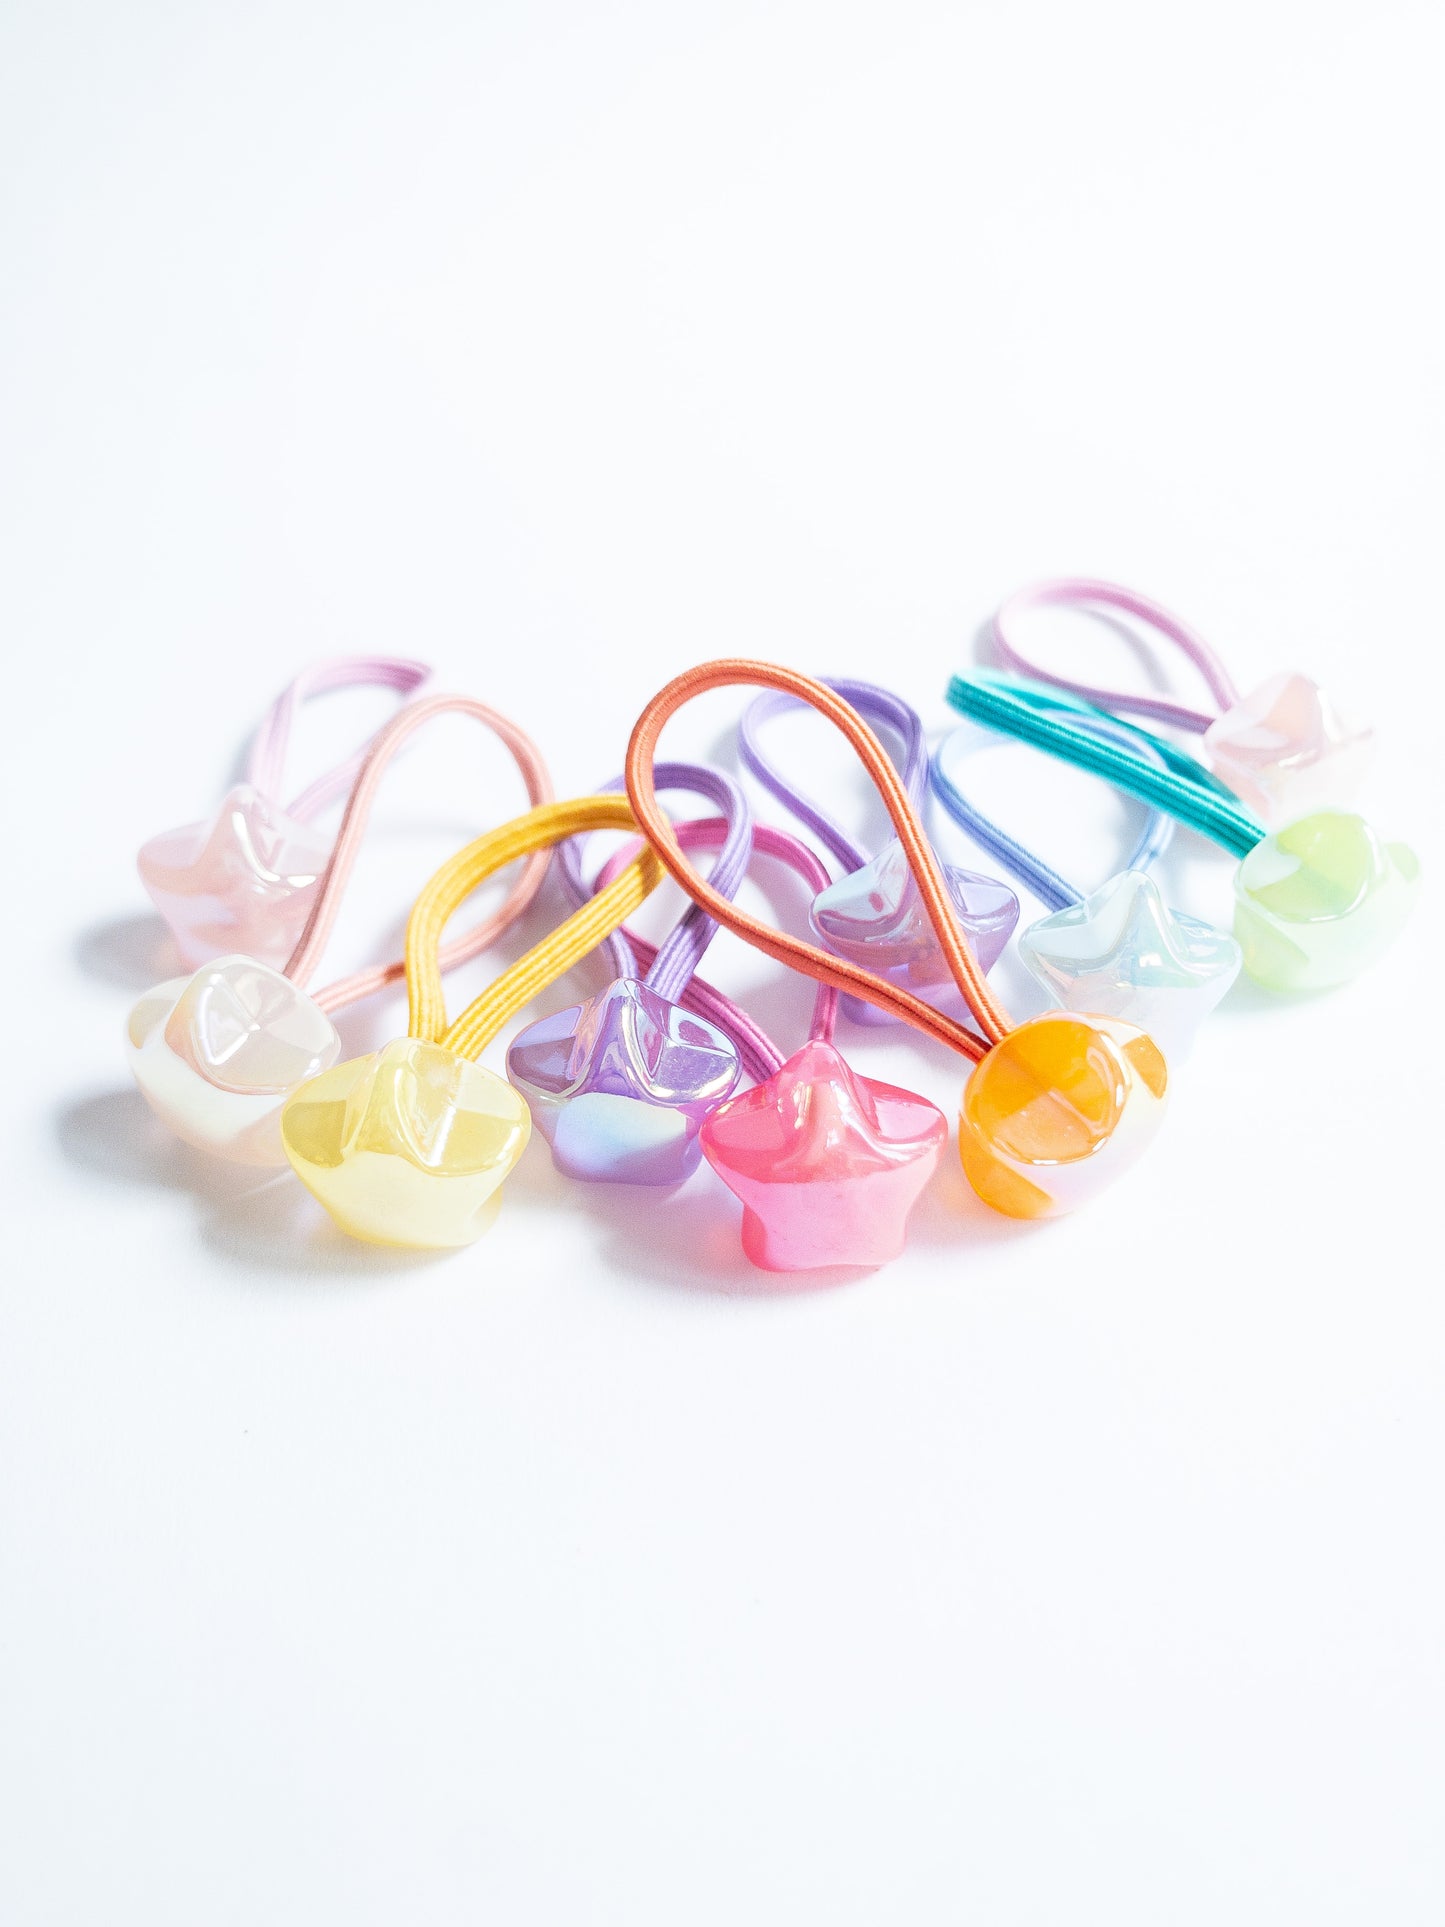 Dreamy, iridescent bubble star hair ties! These pearly hair ties glisten and gleam in candy taffy colors. They're strong enough to hold hairstyles and cute enough to wear them all at once. Each set contains 10 hair ties.